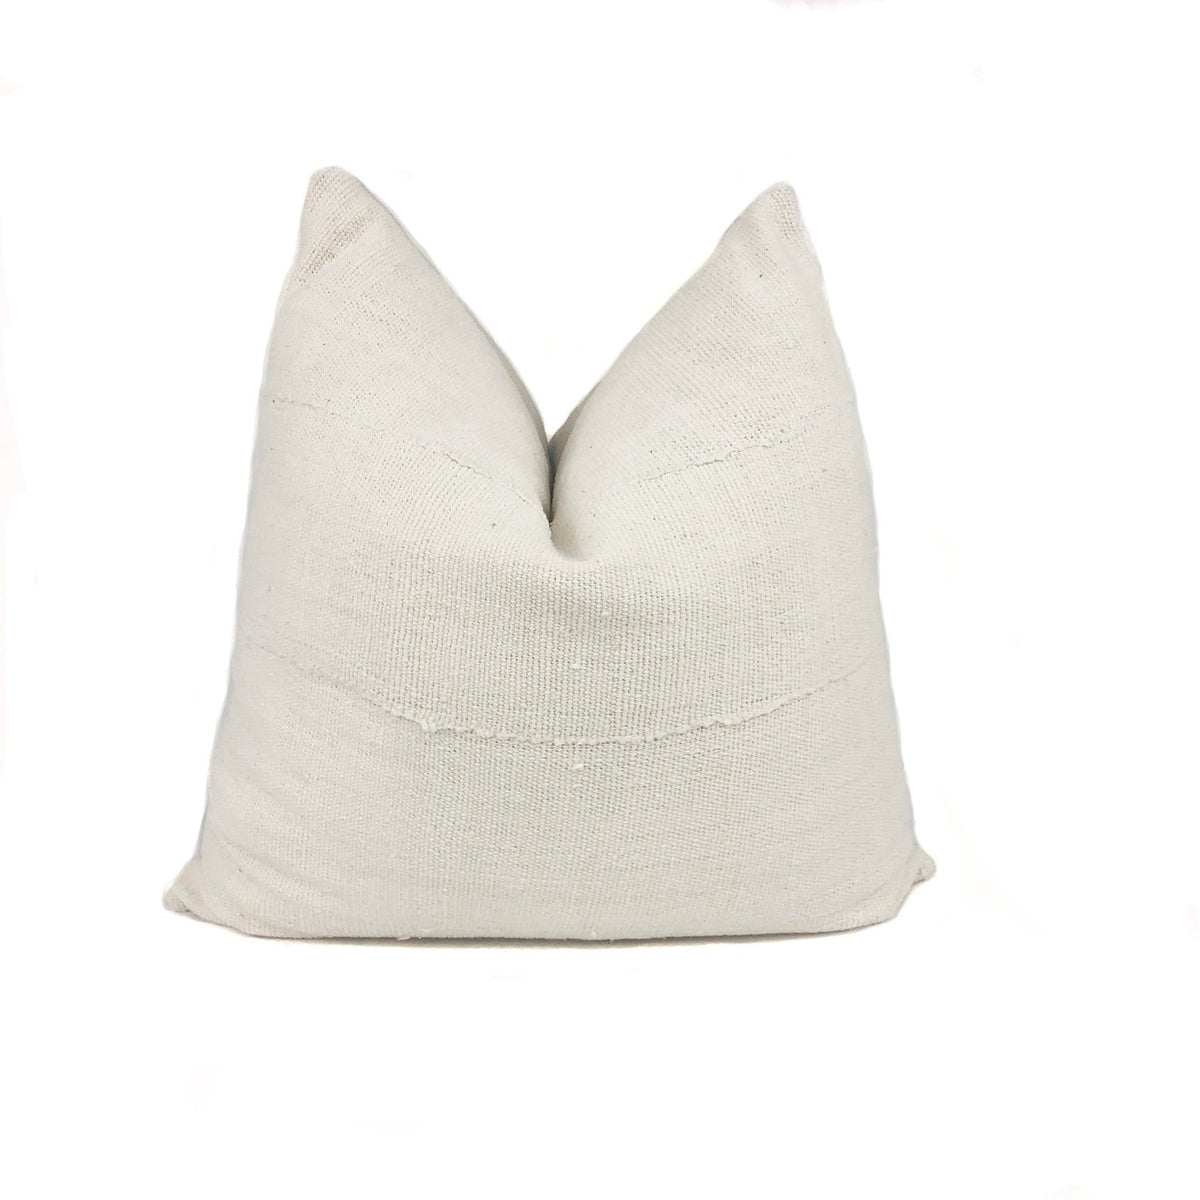 Hermosa Pillow Combo | 5 Pillow Covers